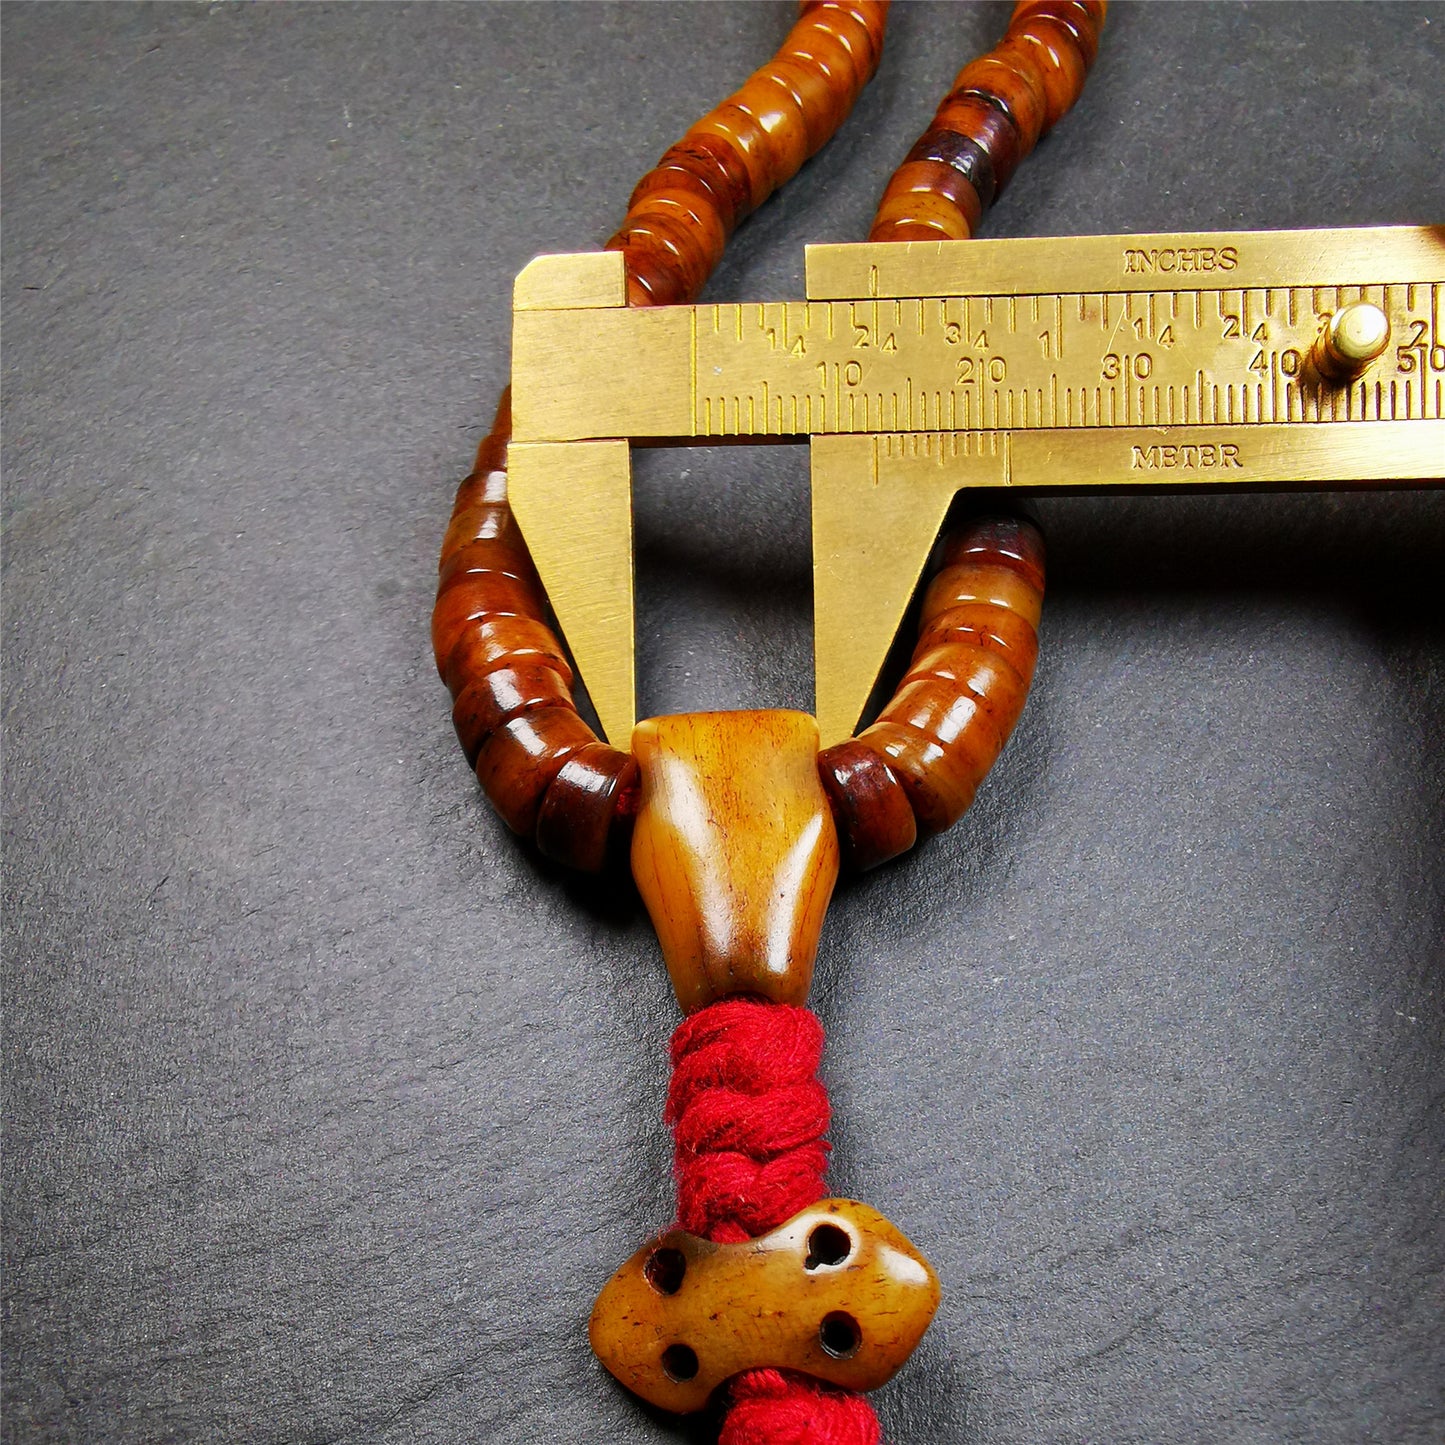 This mala was made by Tibetan craftsmen,about 30 years old.  It is made of yak bone, brown color,108 beads diameter of 8.5mm / 0.34",circumference is 48cm / 18.9",include 3 spacer beads, 1 guru bead,and 1 bone vajra pendant.